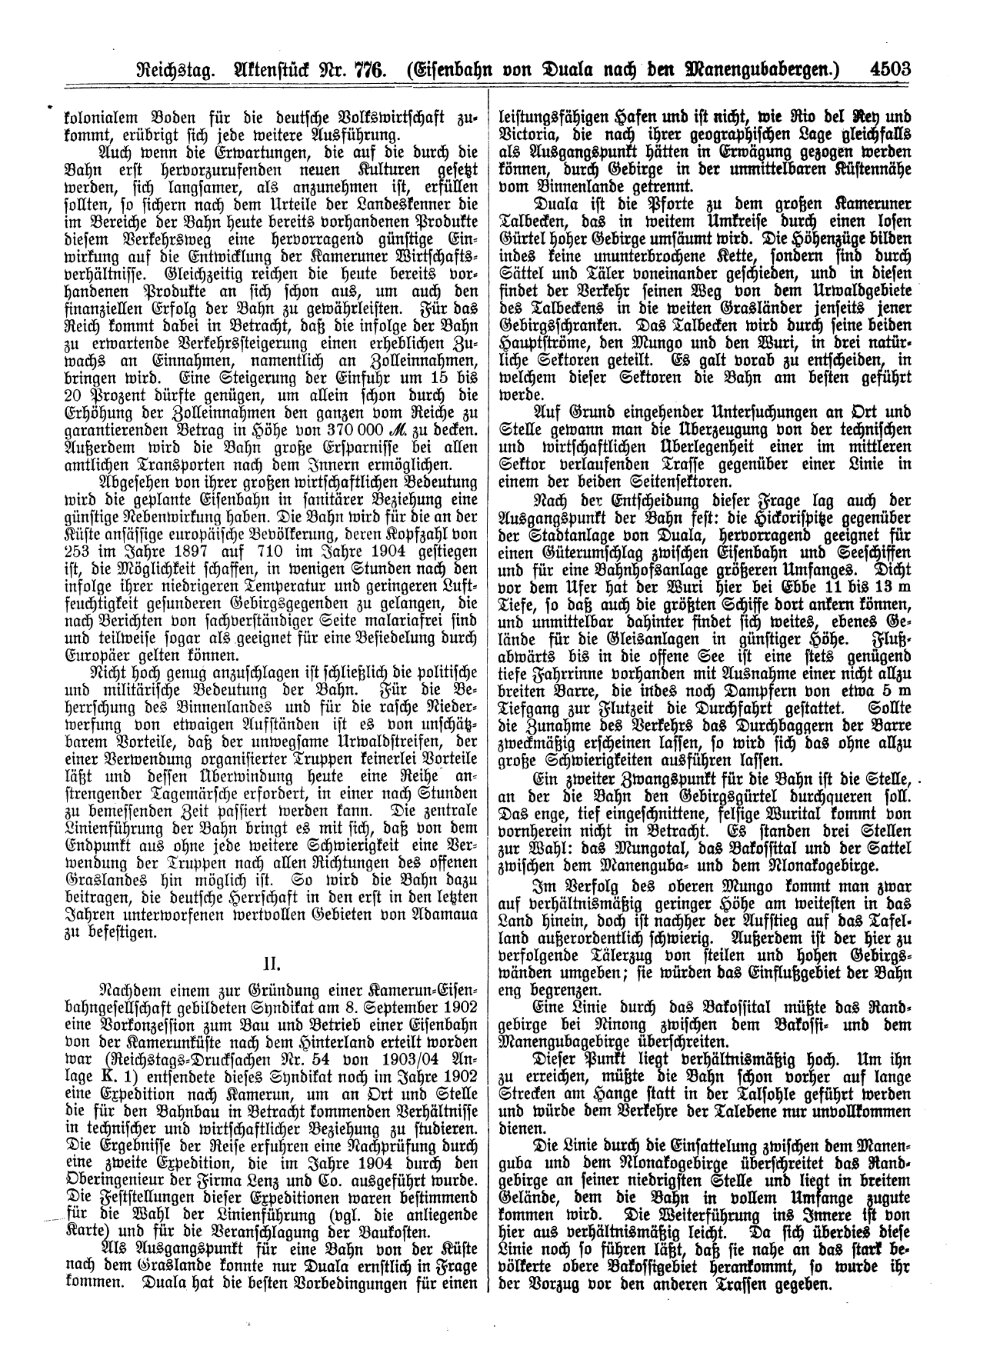 Scan of page 4503